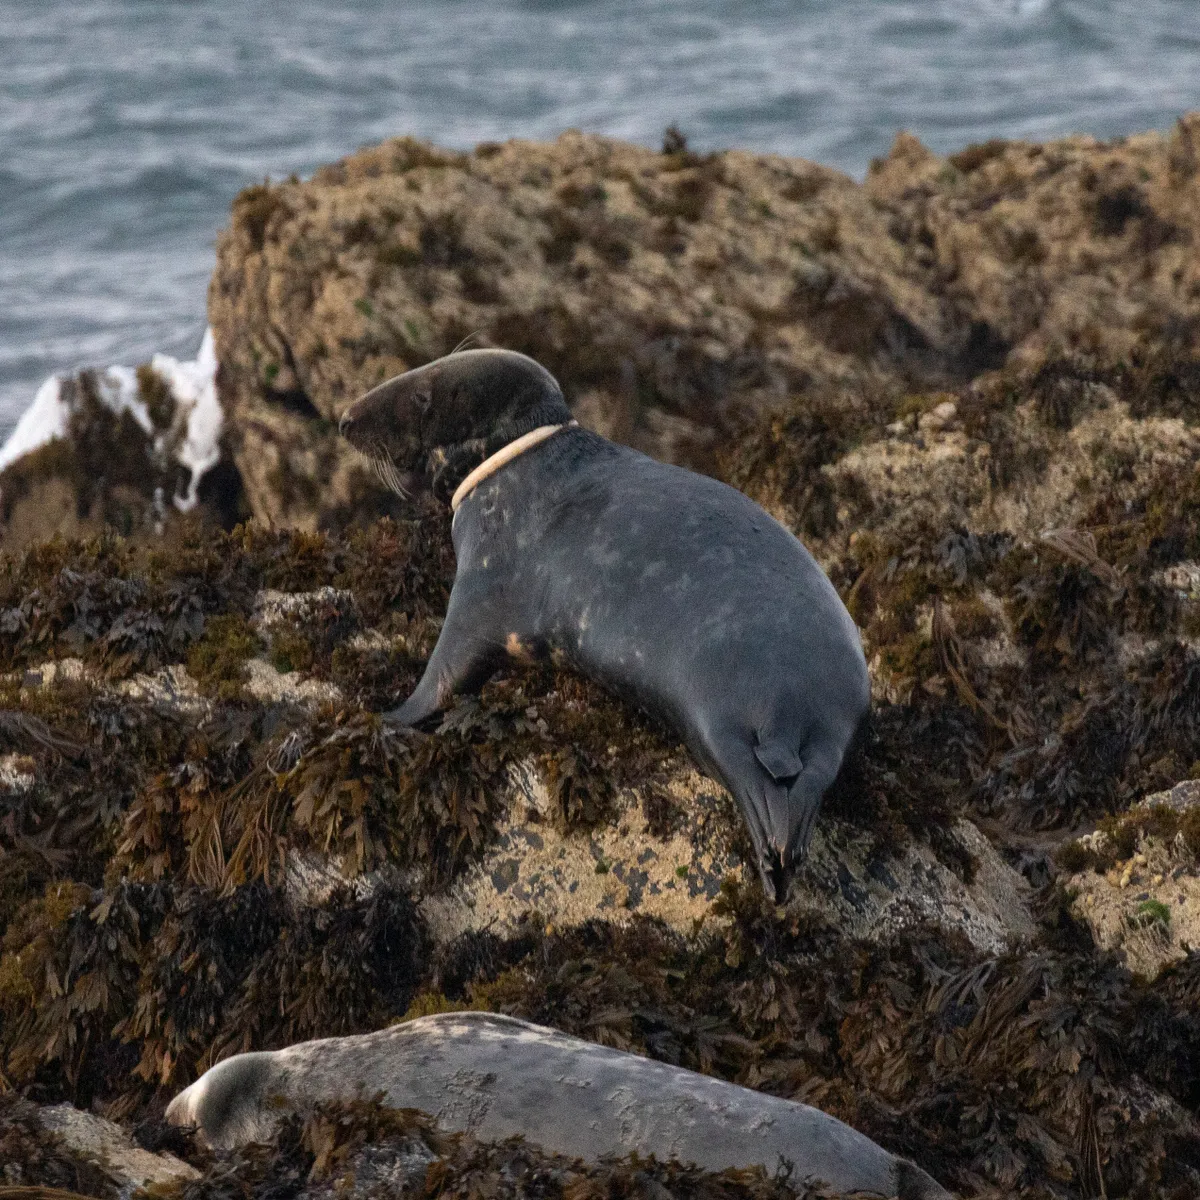 Seal with plastic ring around its neck on rocks